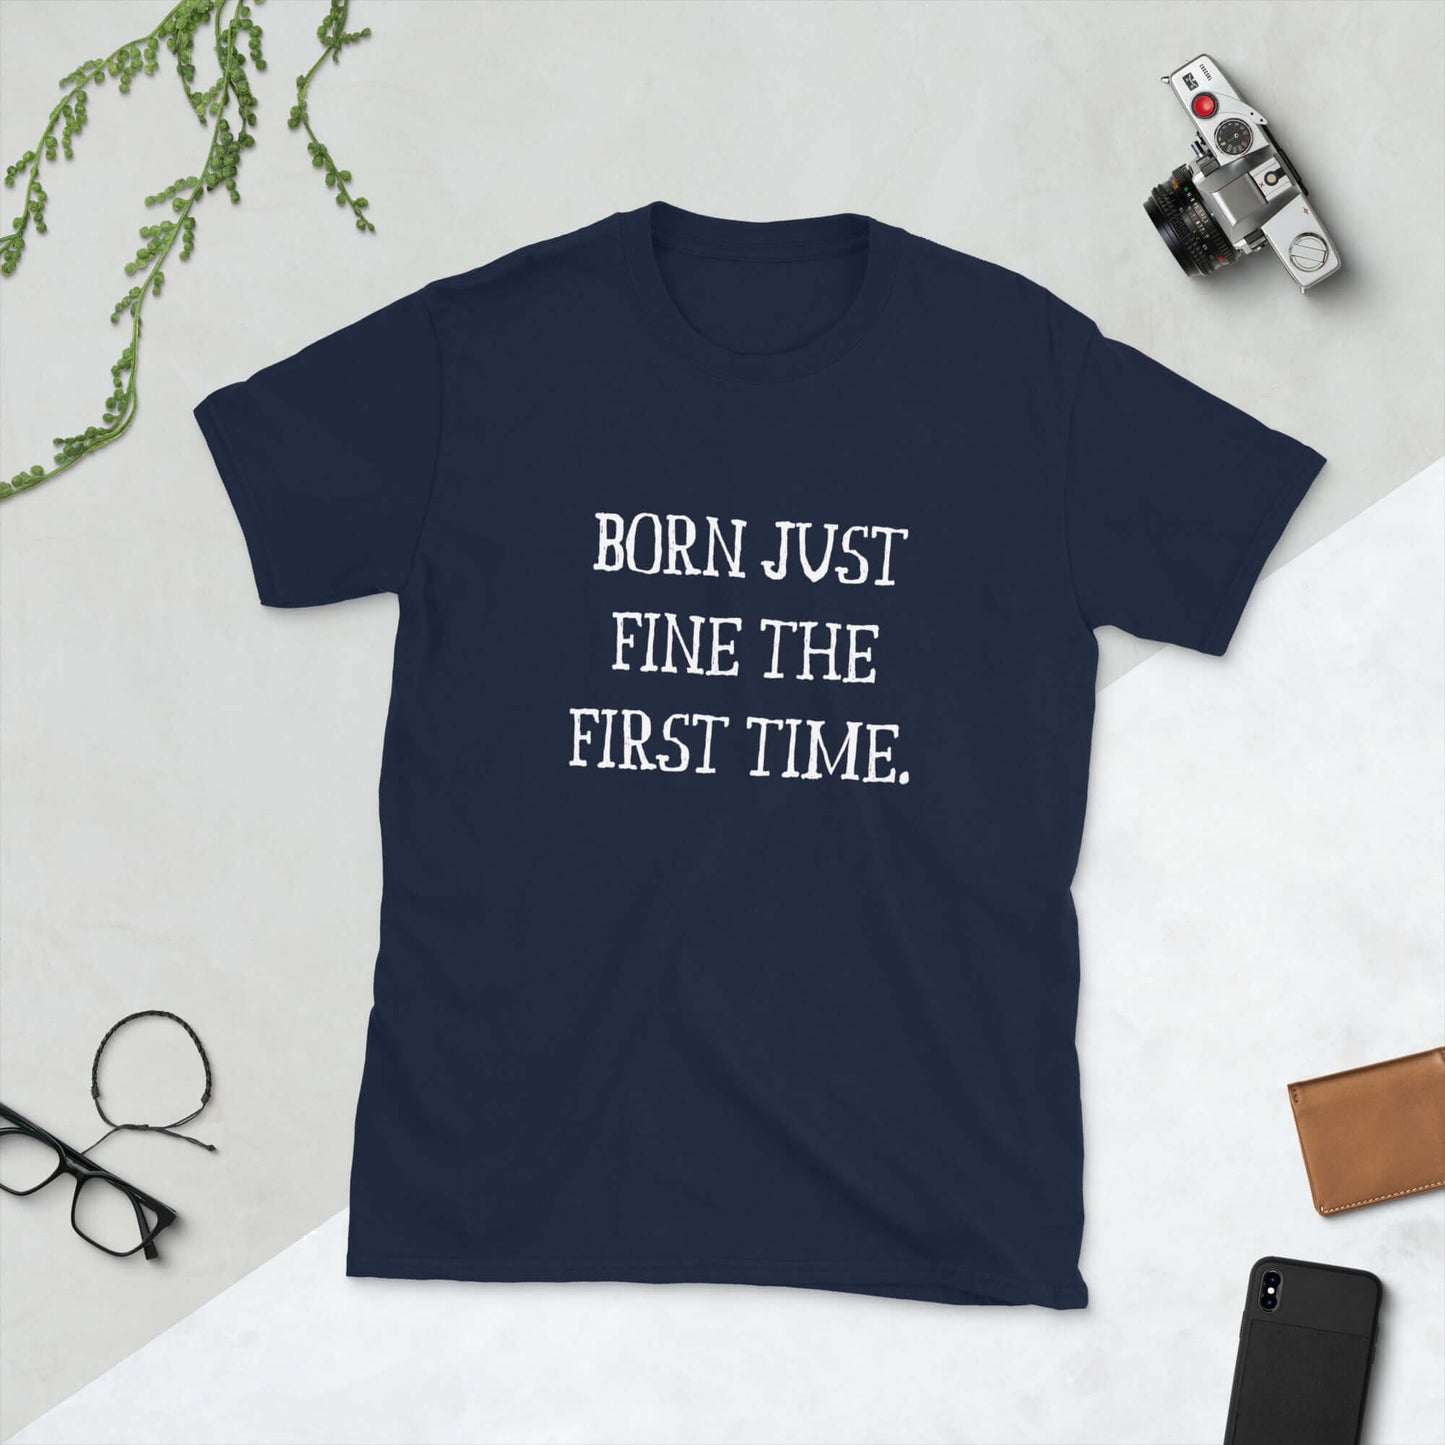 Navy blue t-shirt with the words Born just fine the first time printed on the front.